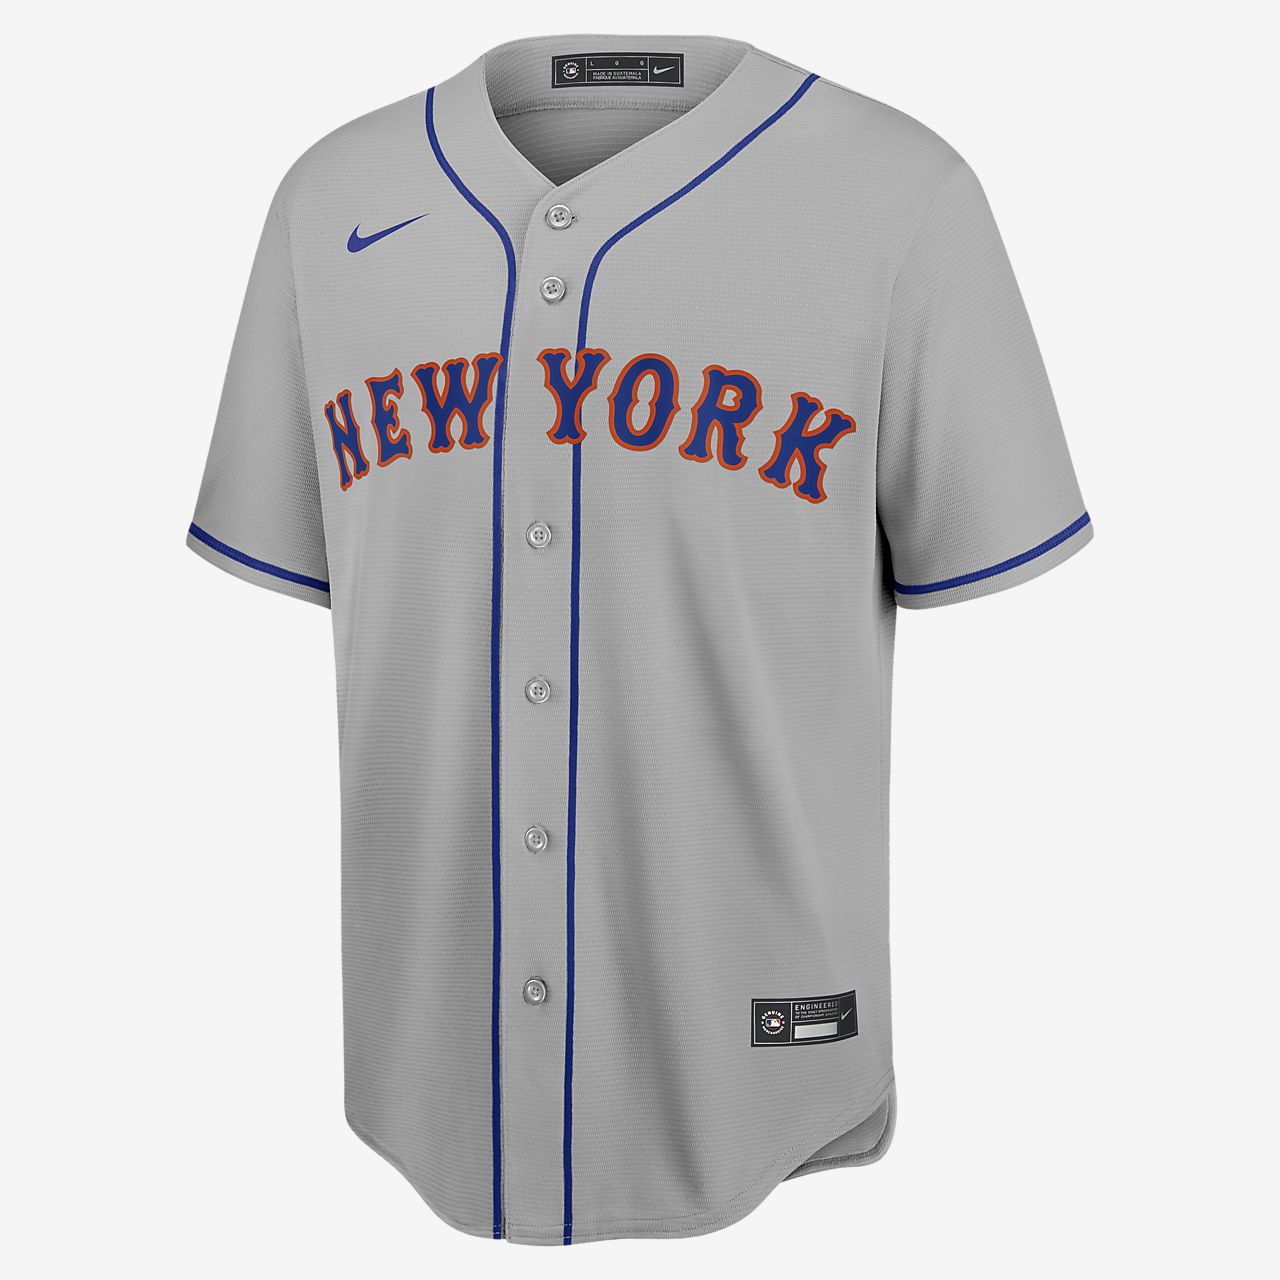 mets shirts for men